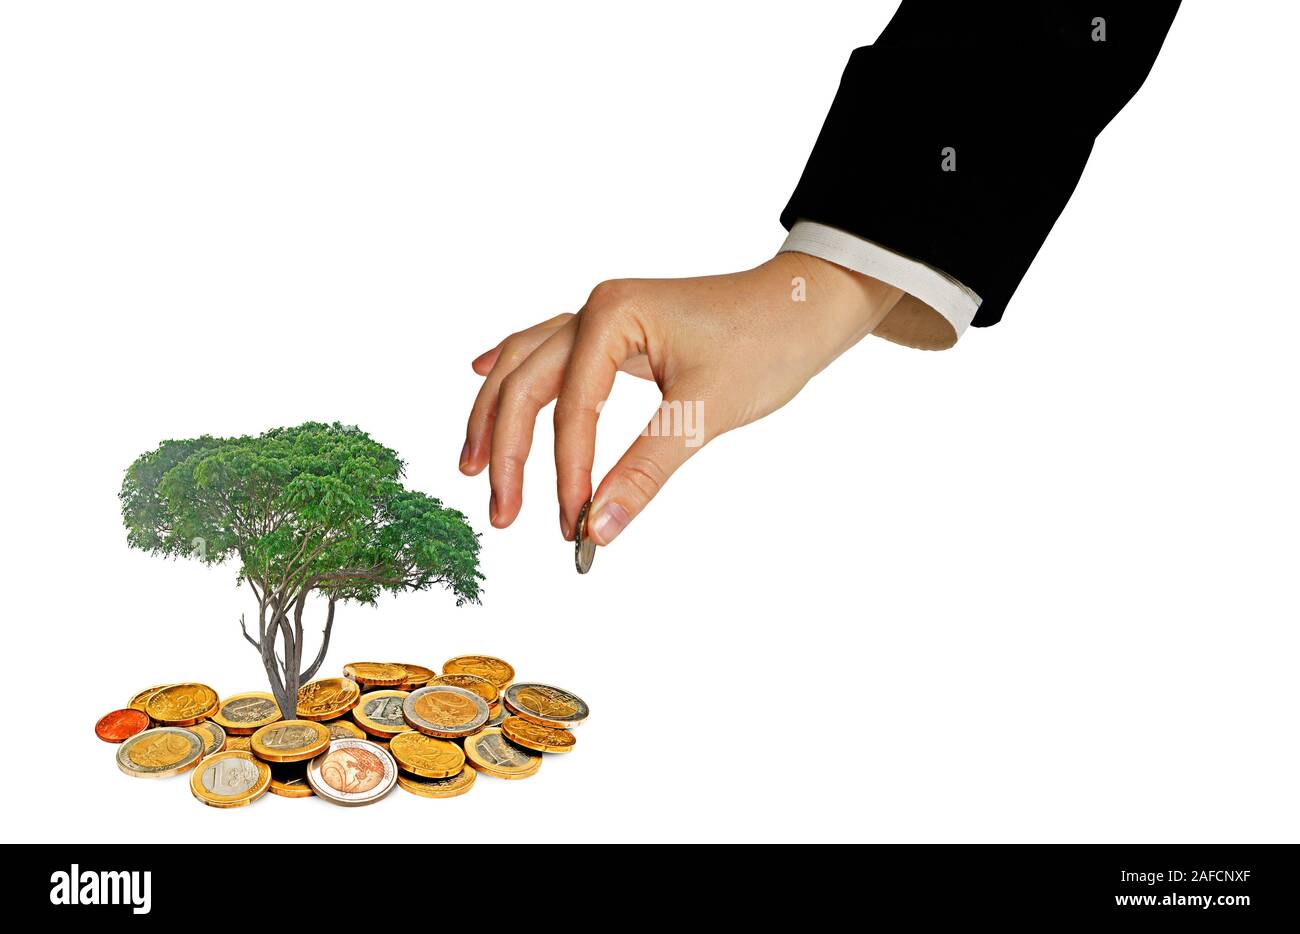 investing to green business Stock Photo